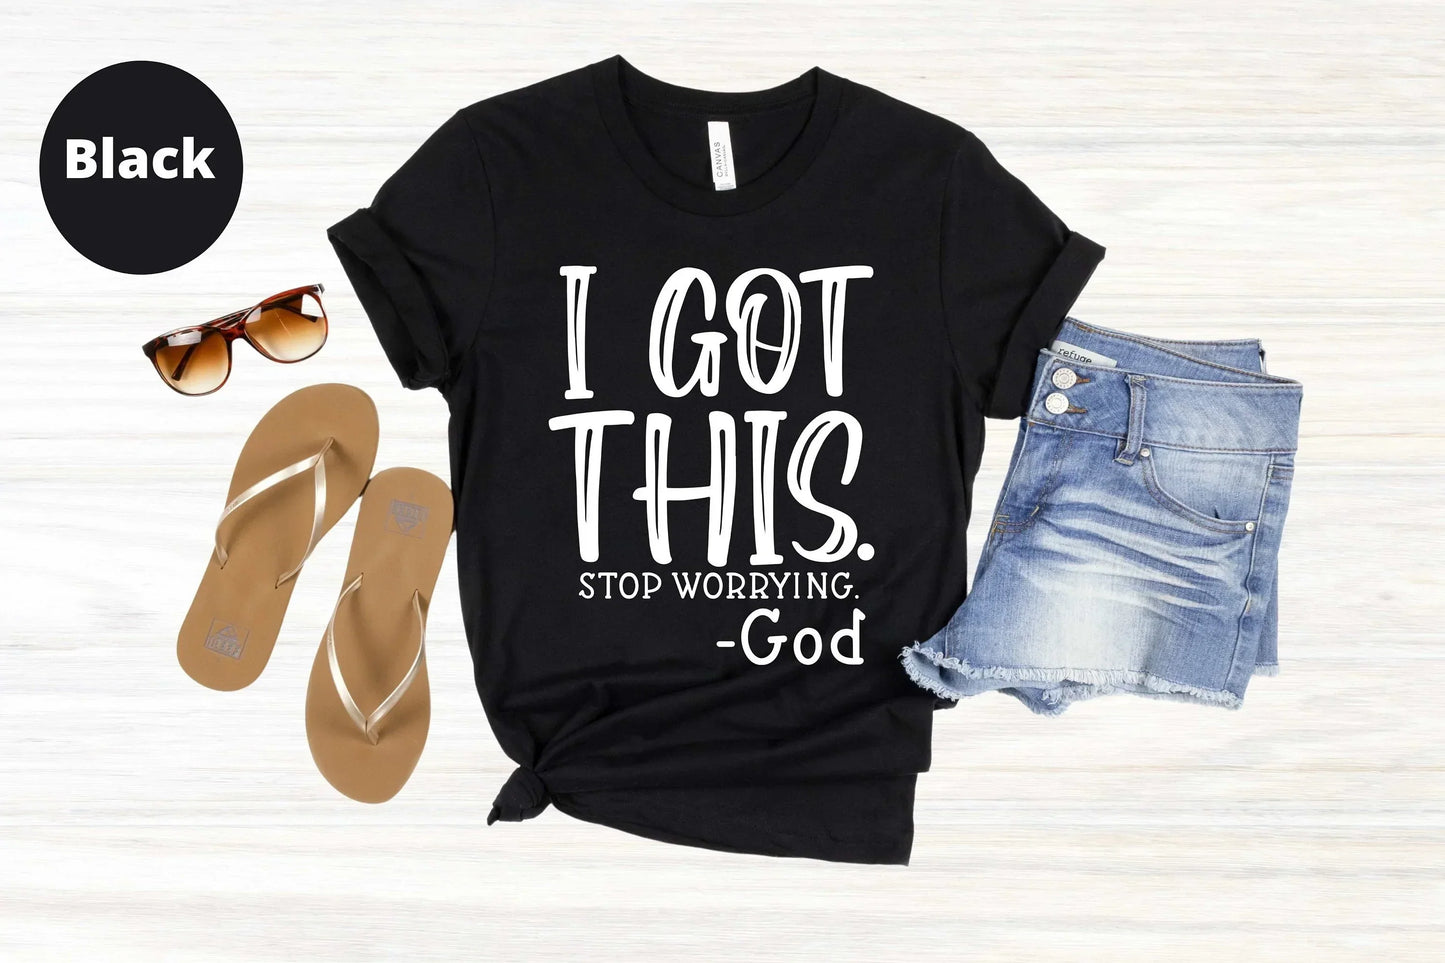 I Got This, Stop Worrying - Believe in God Shirt